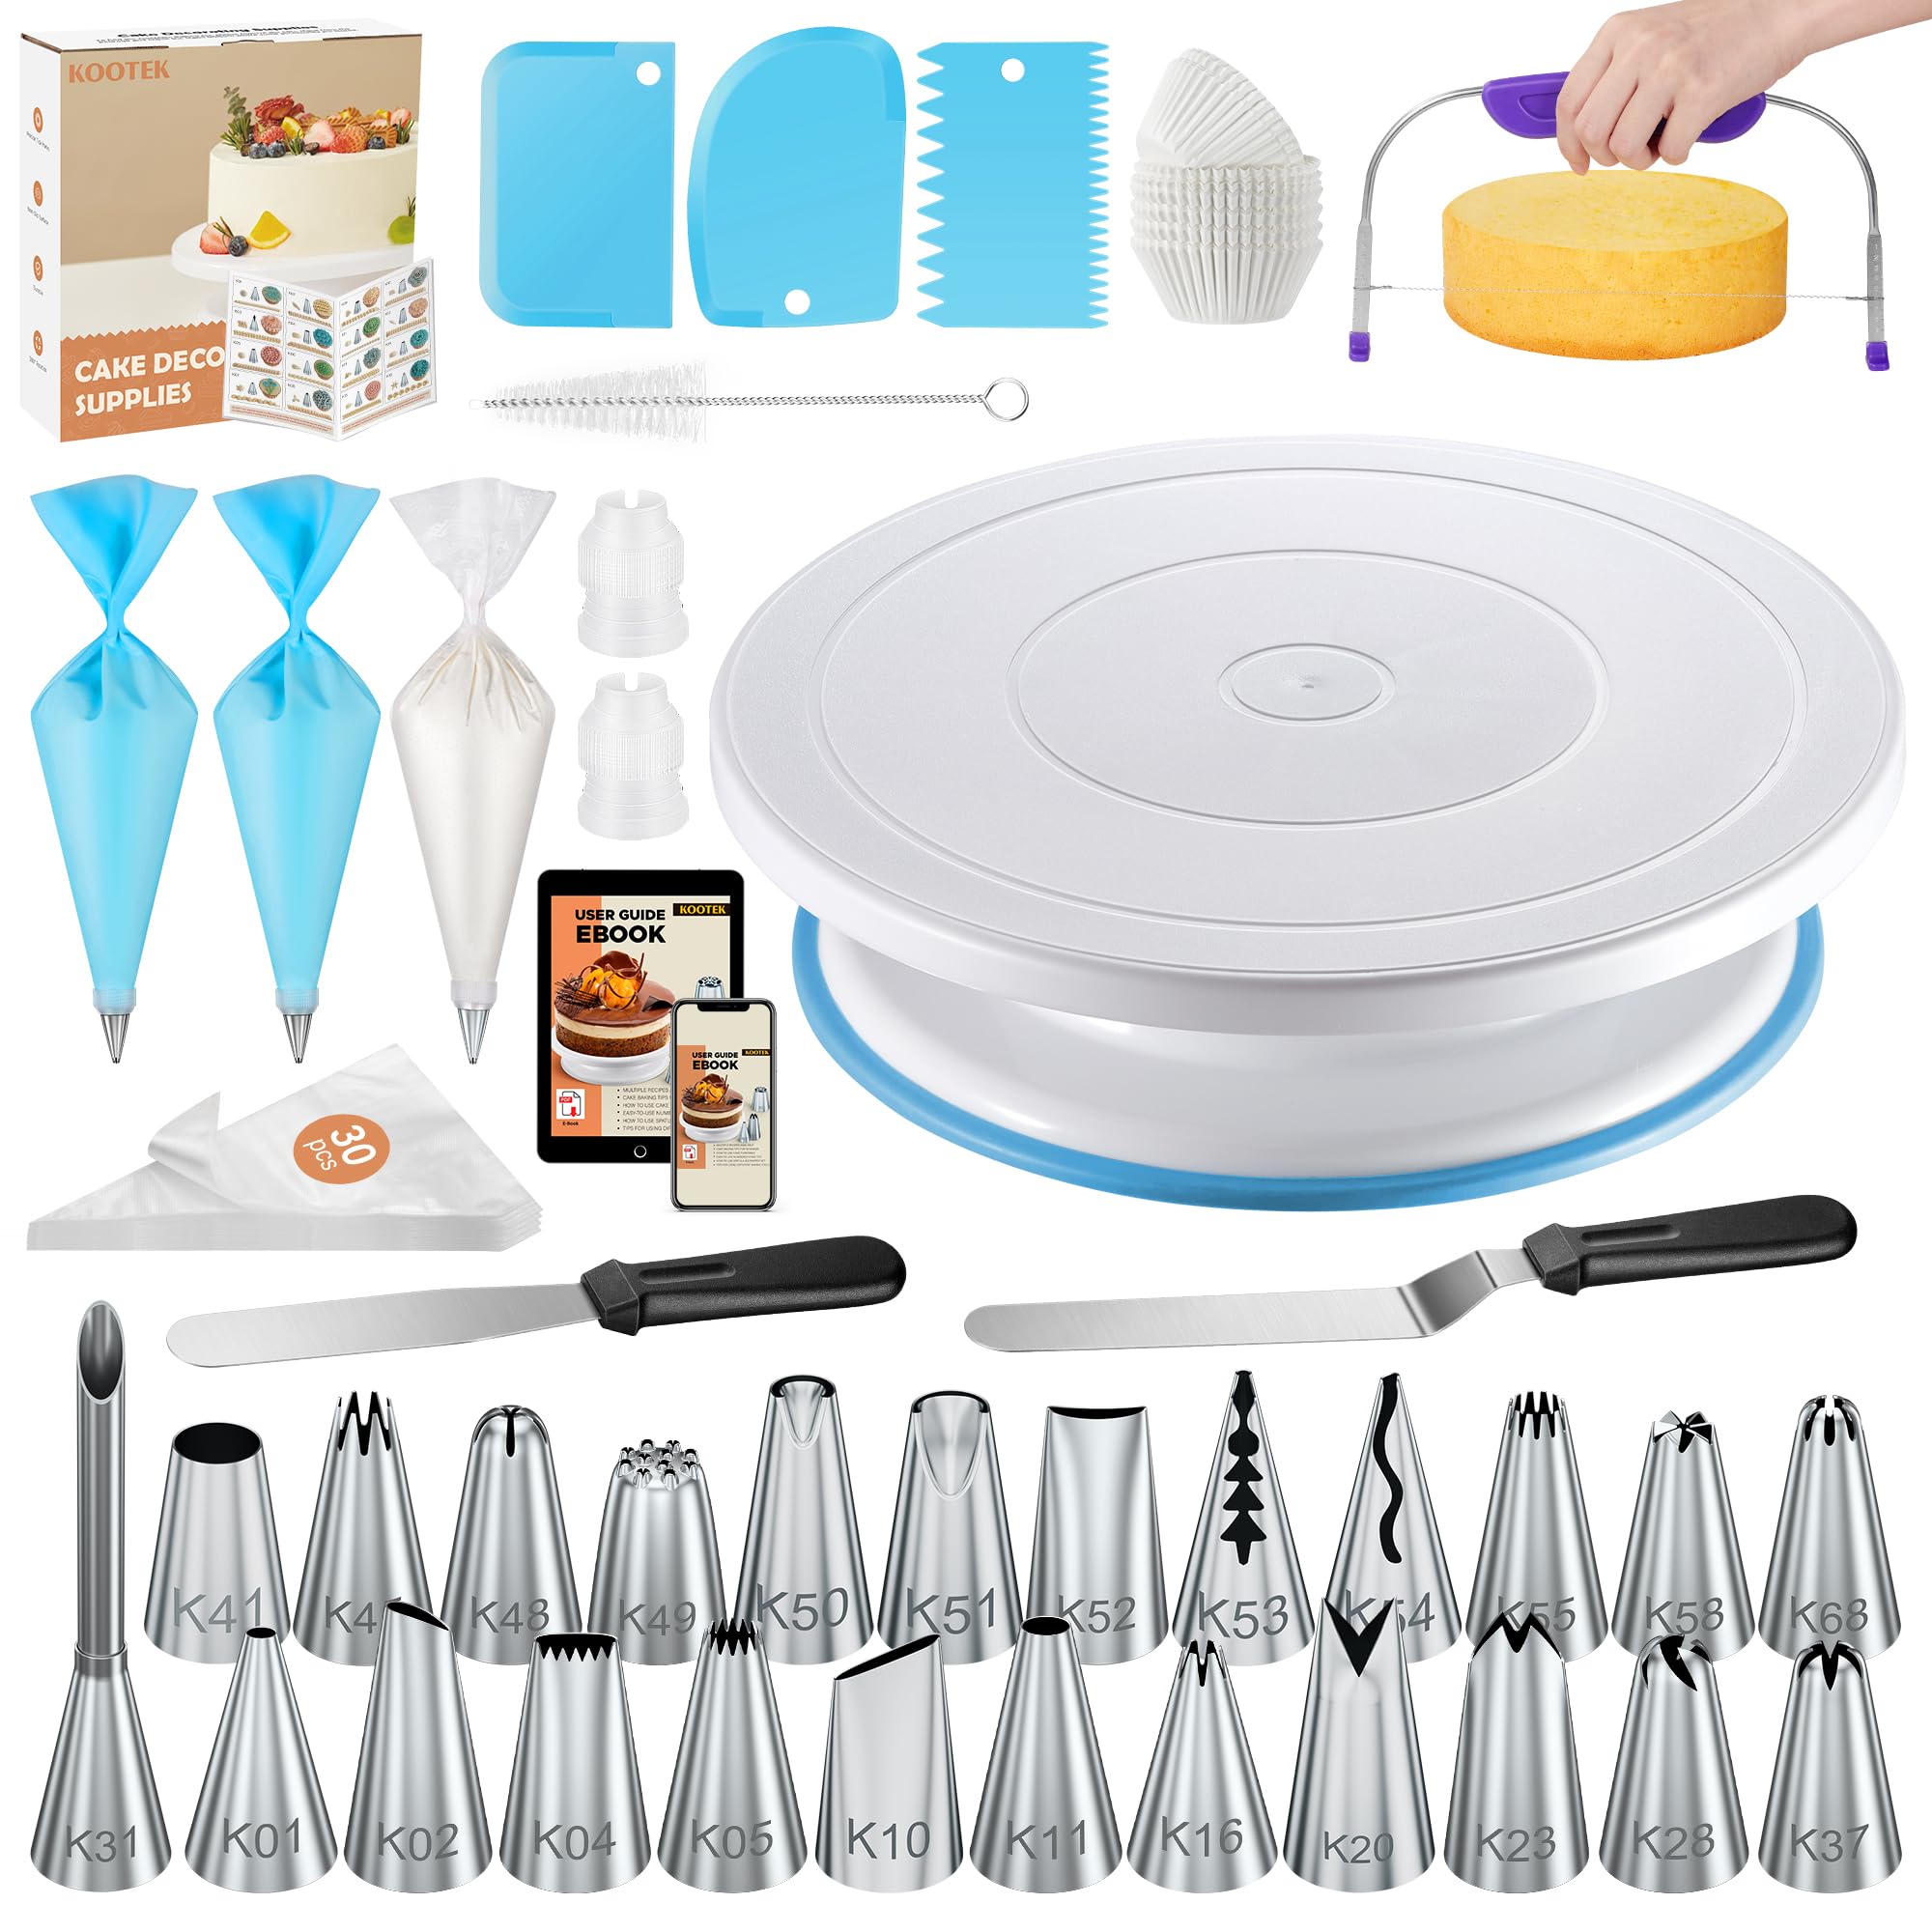 Kootek 96PCs Cake Decorating Supplies Kits with Ebook, Cake Turntable, 30+2 Piping Bags, 30 Disposable Cupcake Liners, 24 Icing Piping Tips, 3 Icing Scrapers, 2 Spatulas, Cake Leveler for Baking